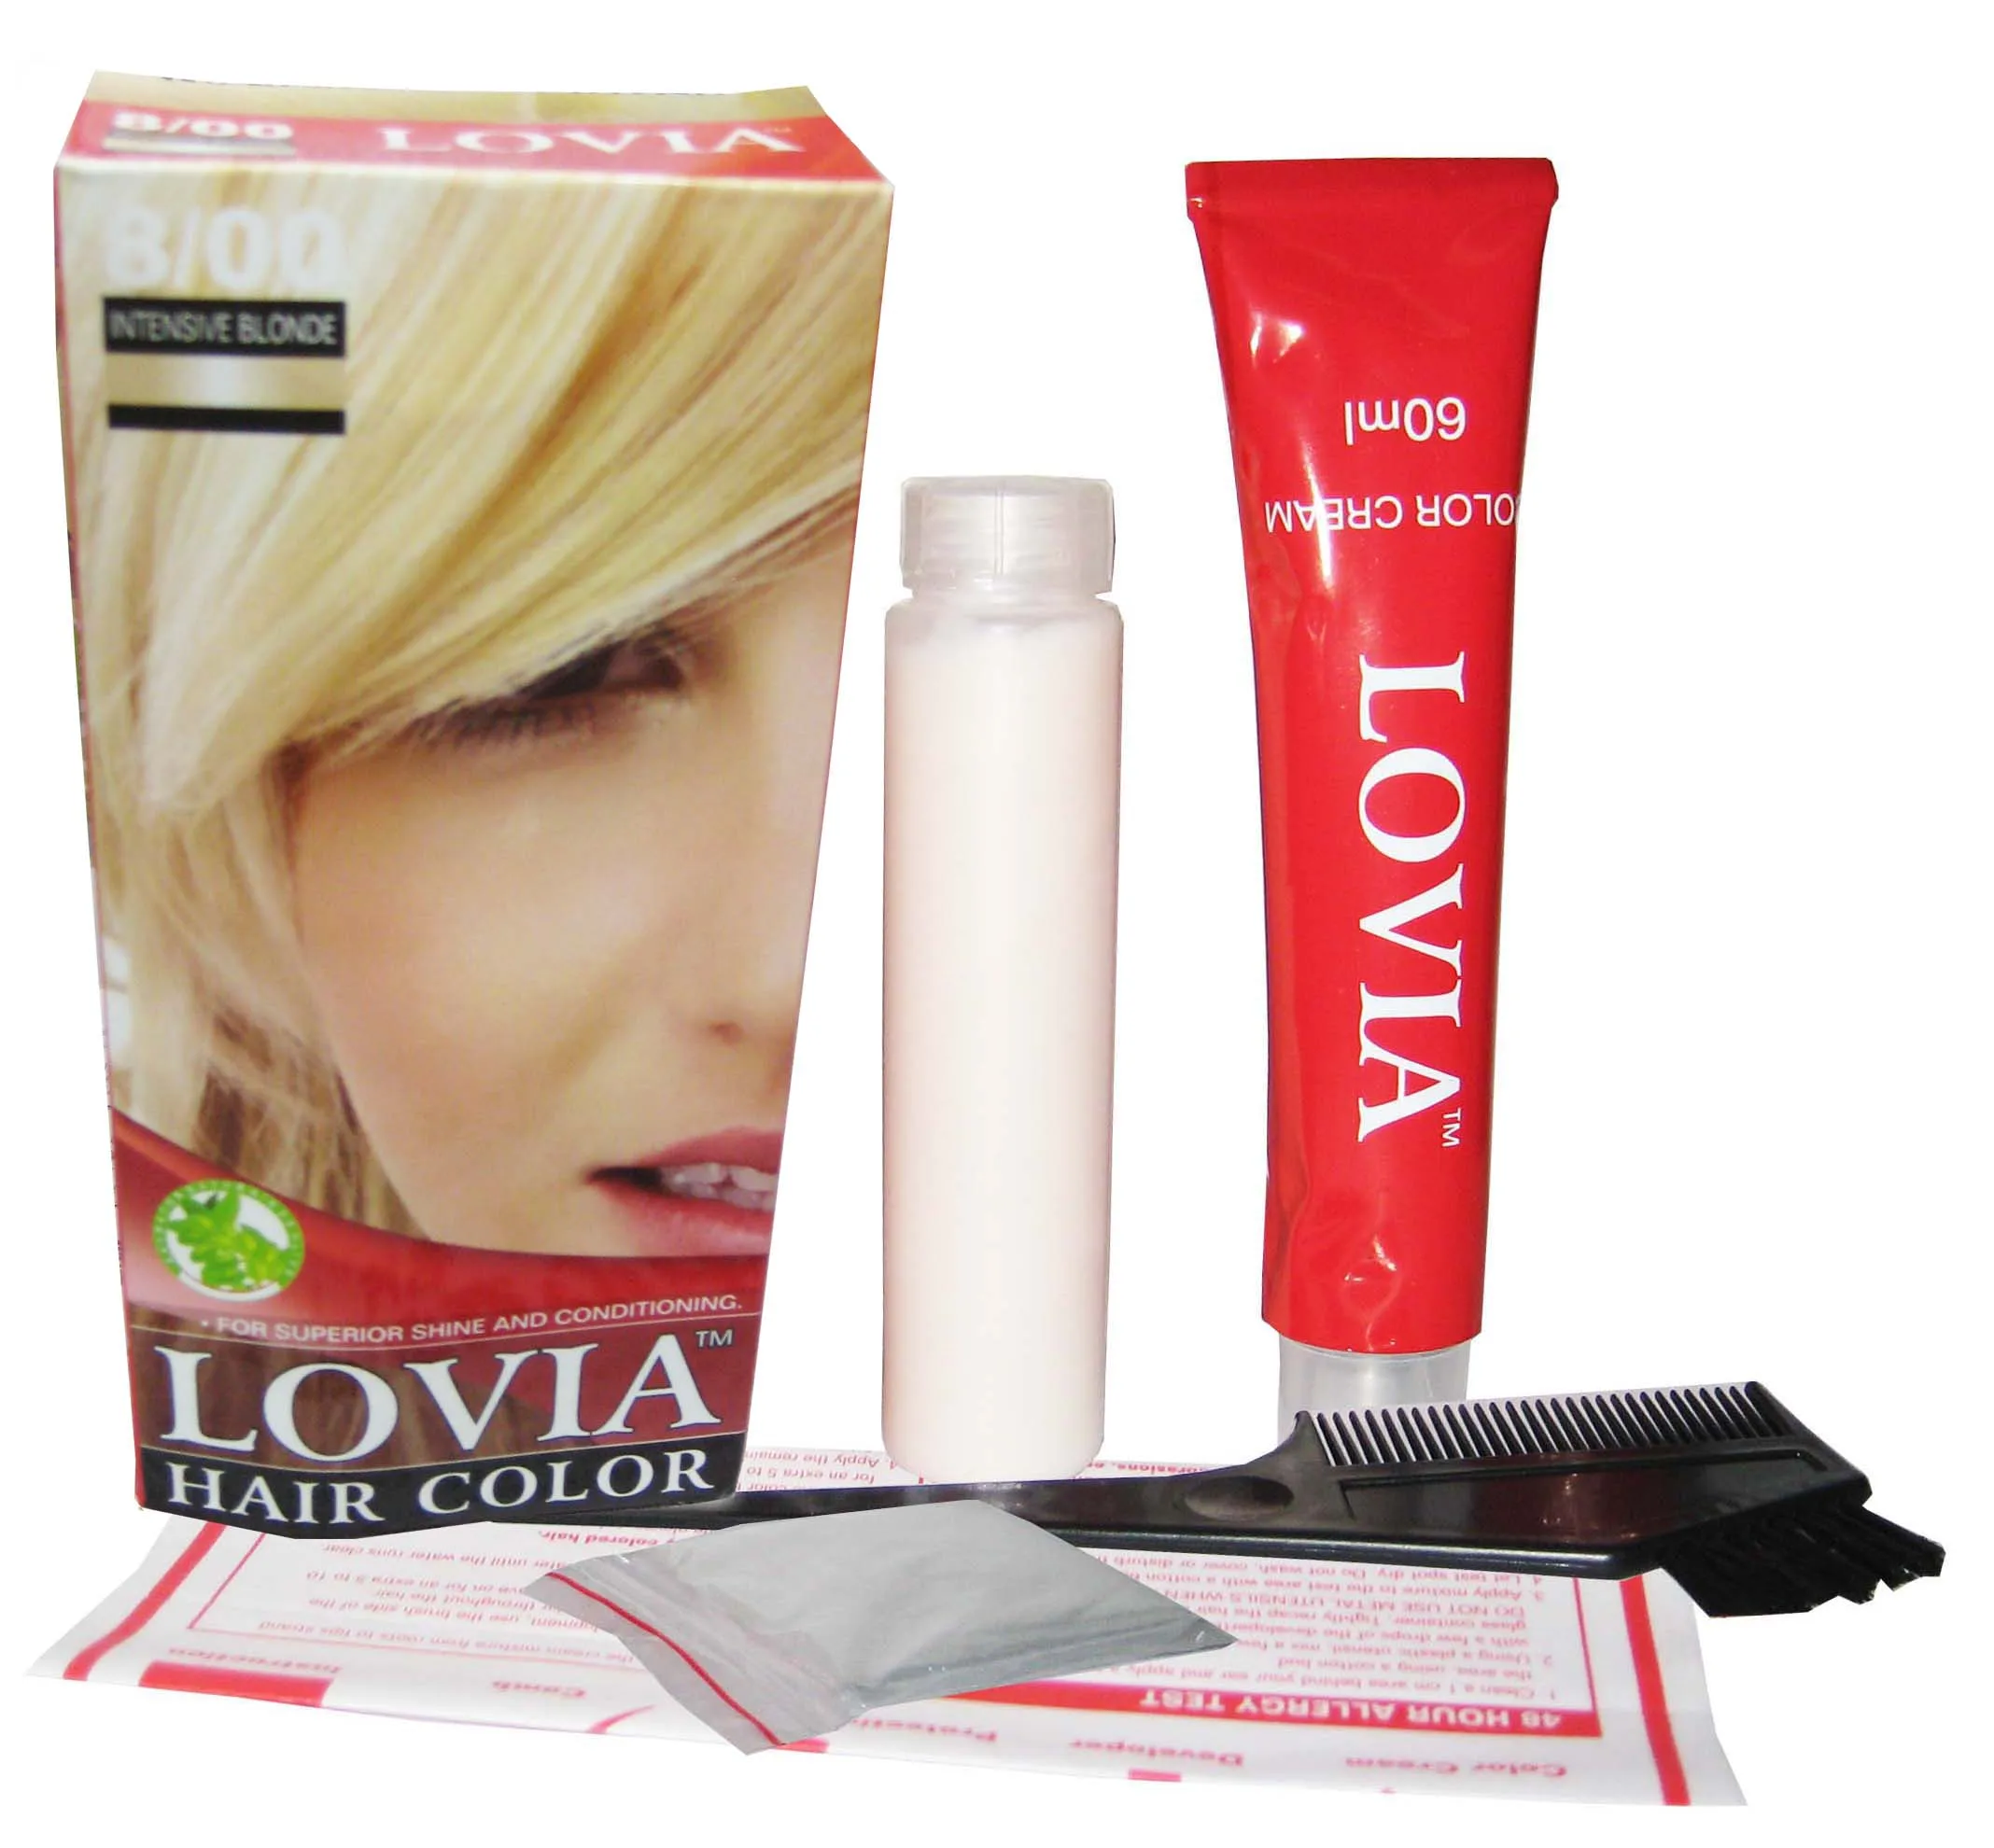 Beauty 2020 Hair Dye Hair Album HOT BEST Fashion LOVIA Hair Color Cream Kit  color button Good Price, View Hair Coloring charts for home use and  professional use, LOVIA Product Details from